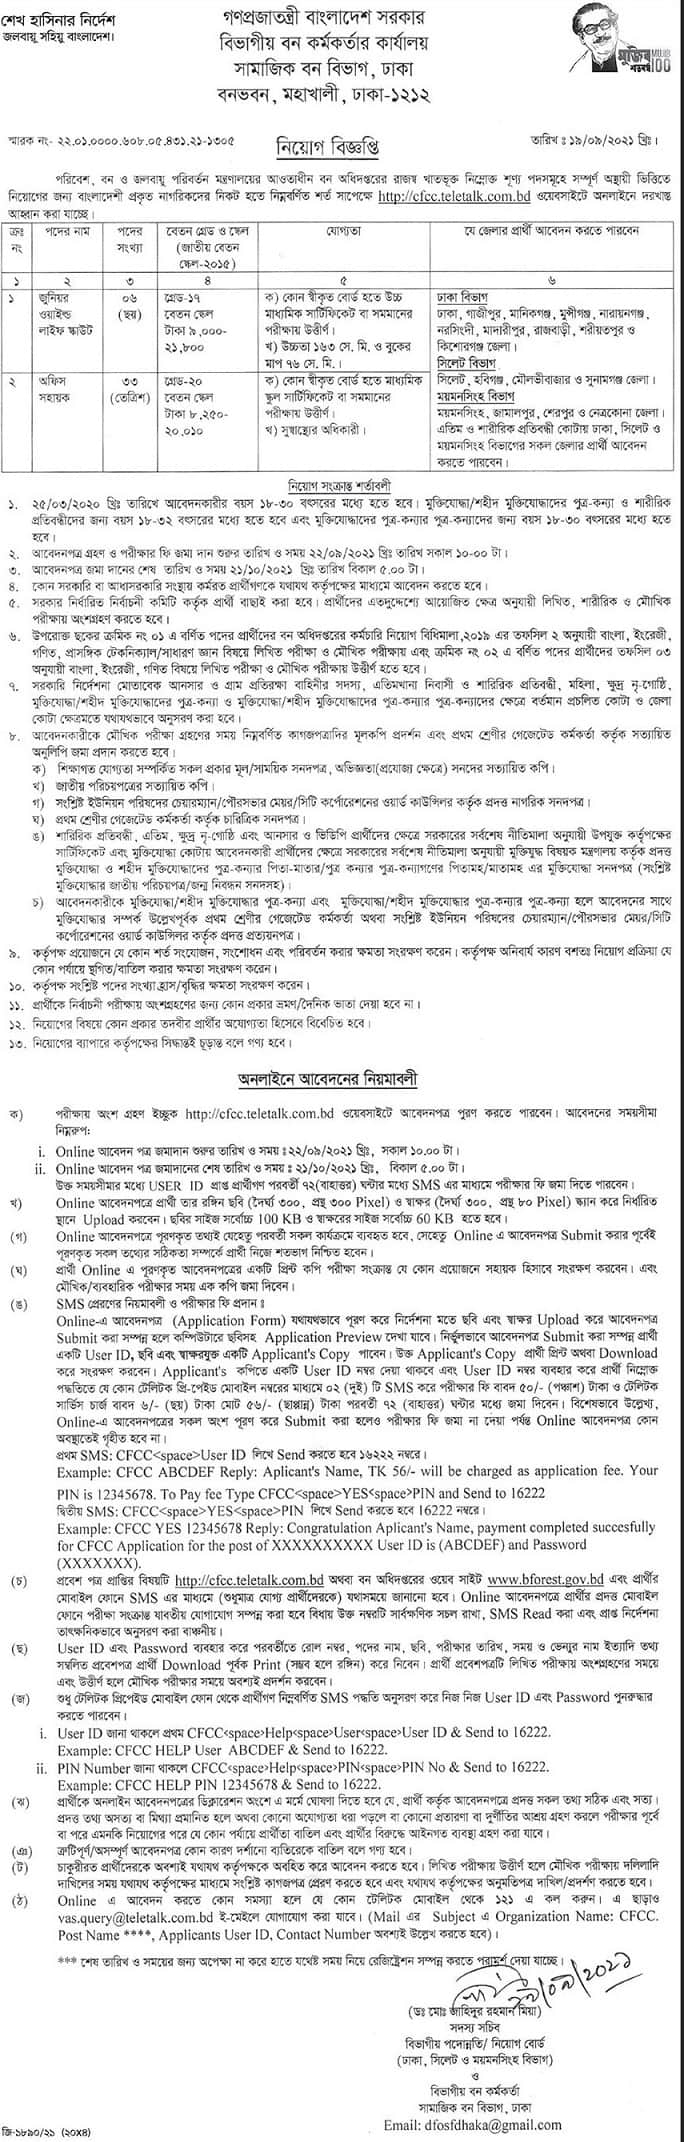 Ministry of Environment, Forest and Climate Change Job Circular